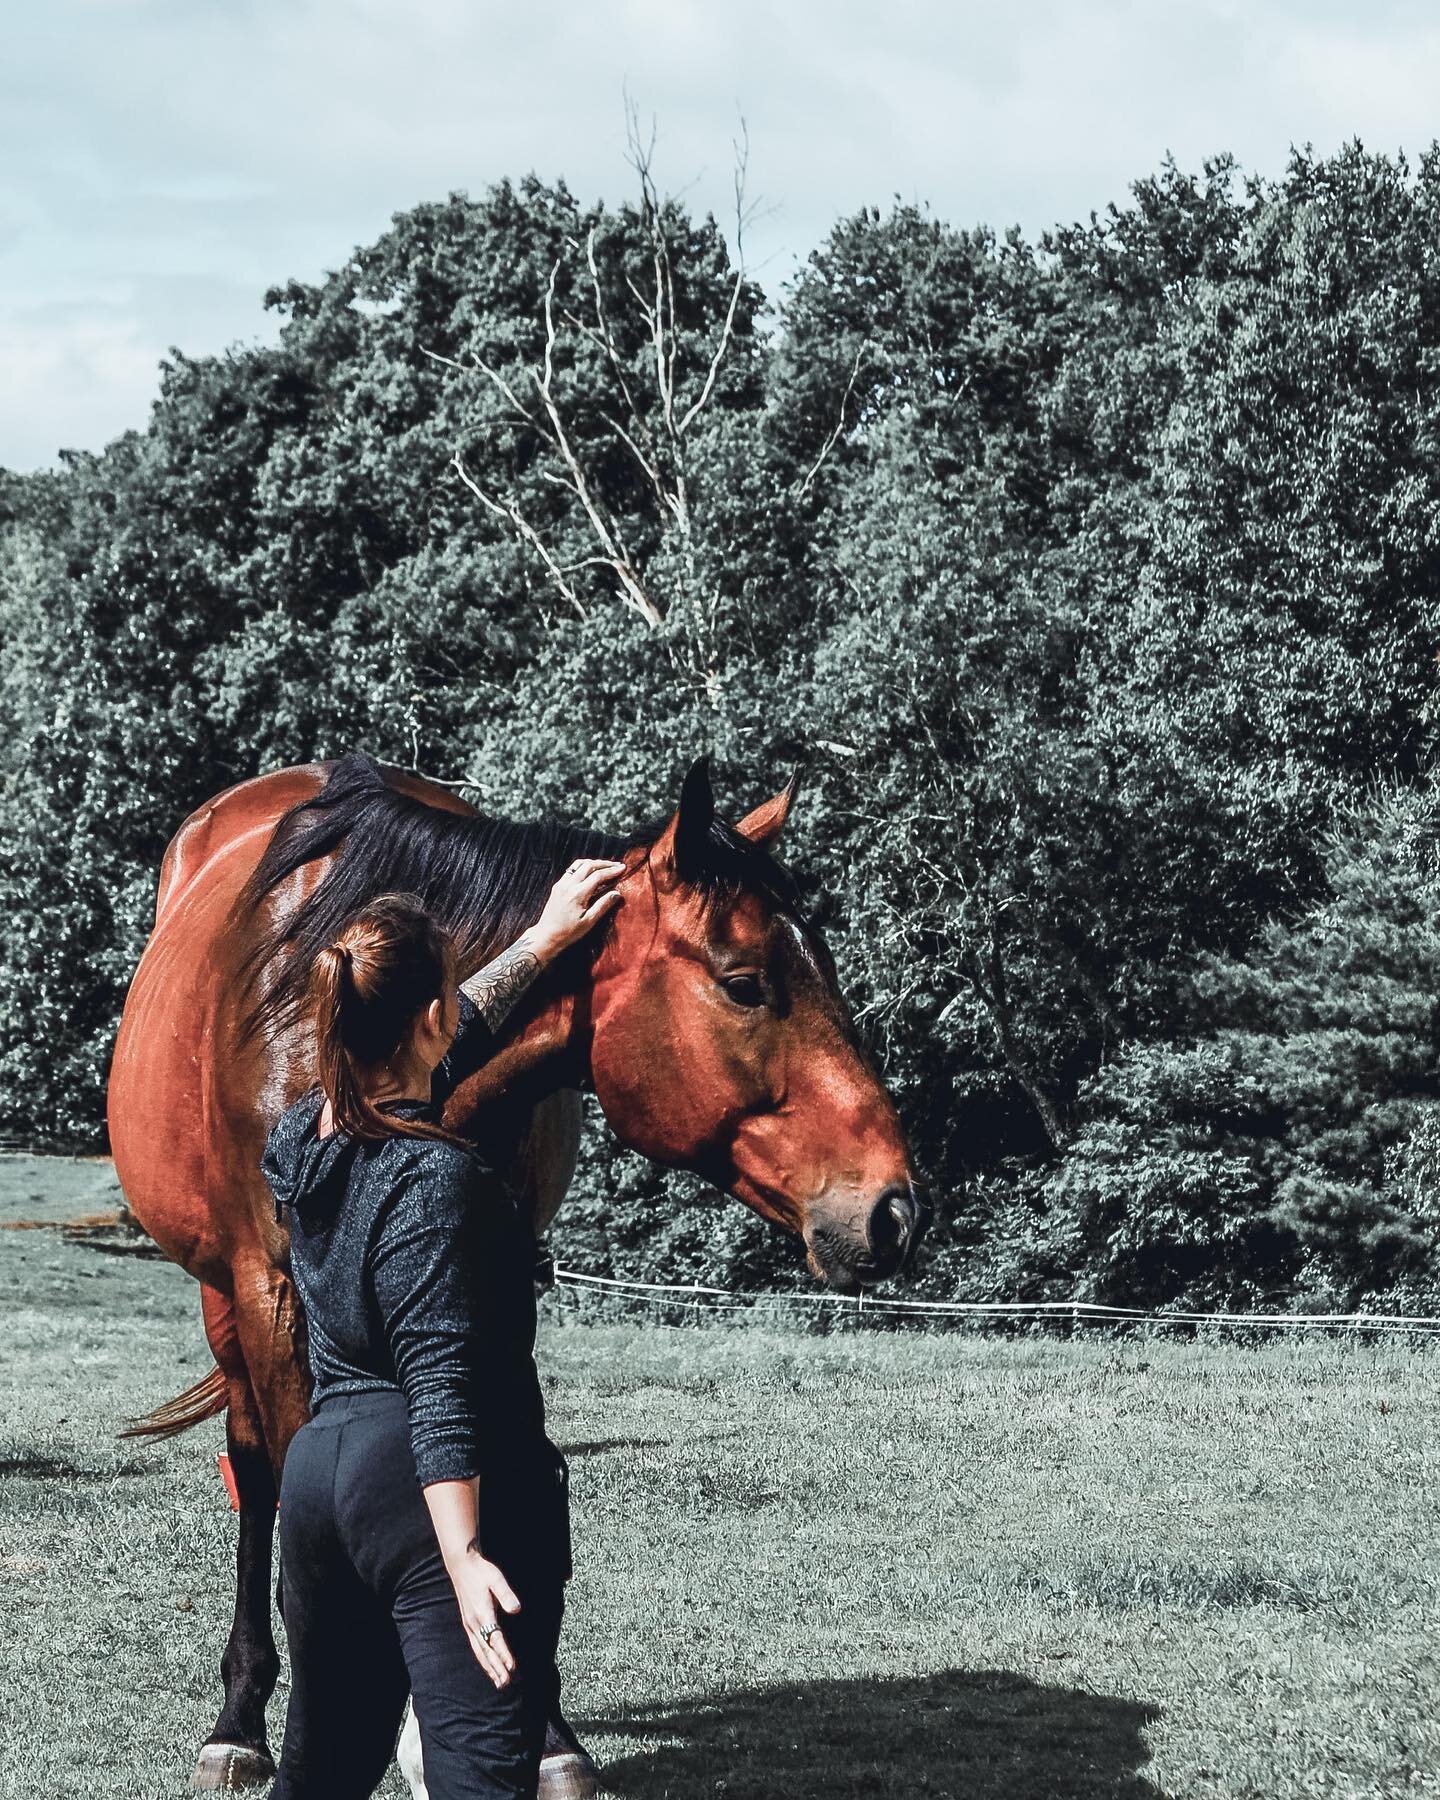 Teaching yoga with horses has been on my bucket list for a long time. I heard about @comeback.project several months ago and was really intrigued by their work rescuing horses and connecting them with those who have experienced trauma, particularly V